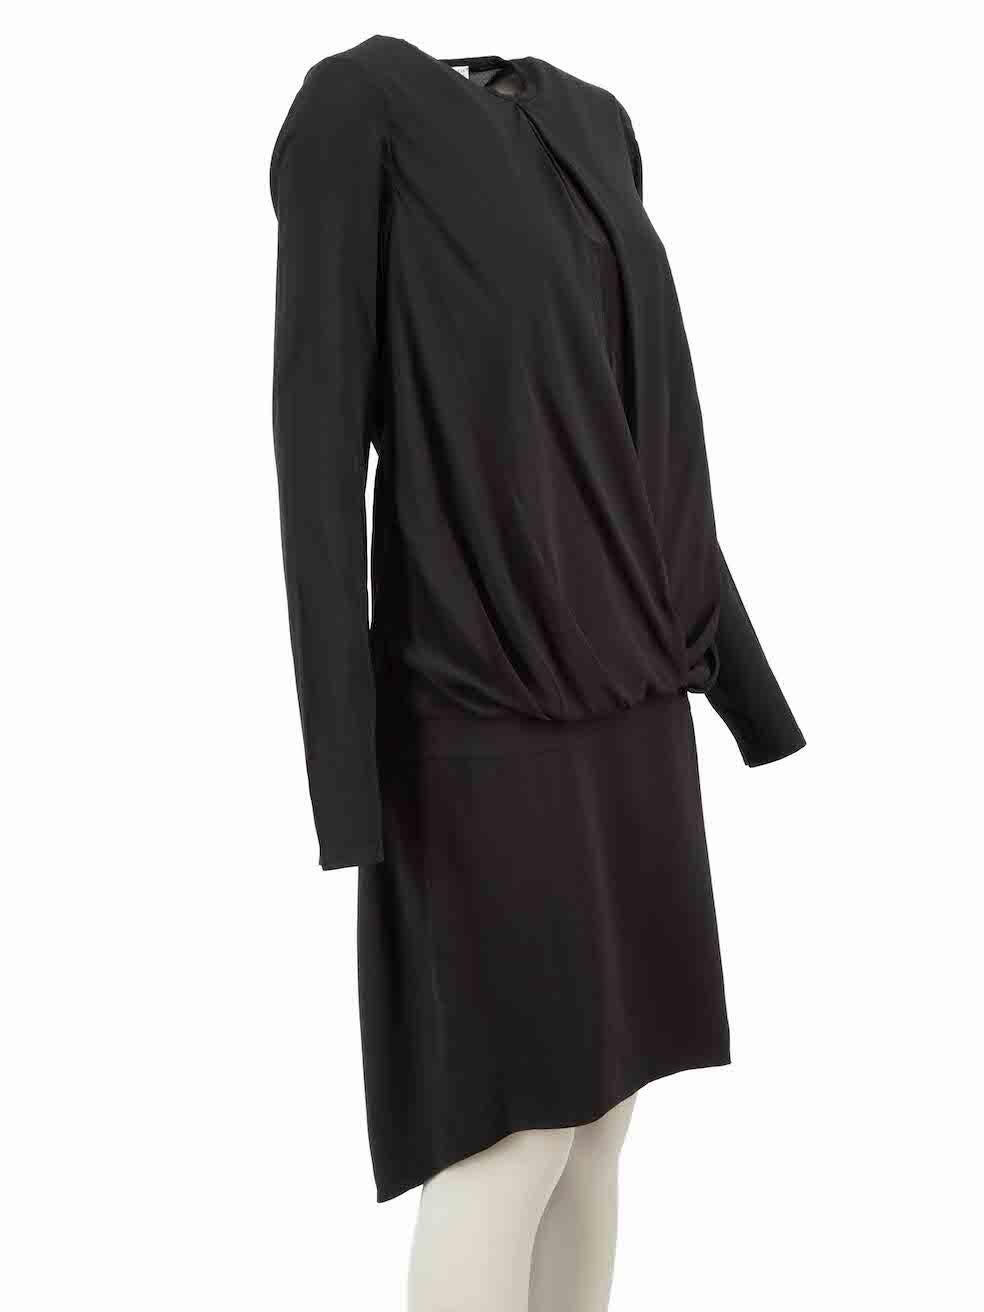 CONDITION is Good. Minor wear to dress is evident. Minor loose threads to hem of right sleeve and minor holes to centre back seam on this used Brunello Cucinelli designer resale item.

Details
Black
Silk
Dress
Mini
Front drape detail
Long